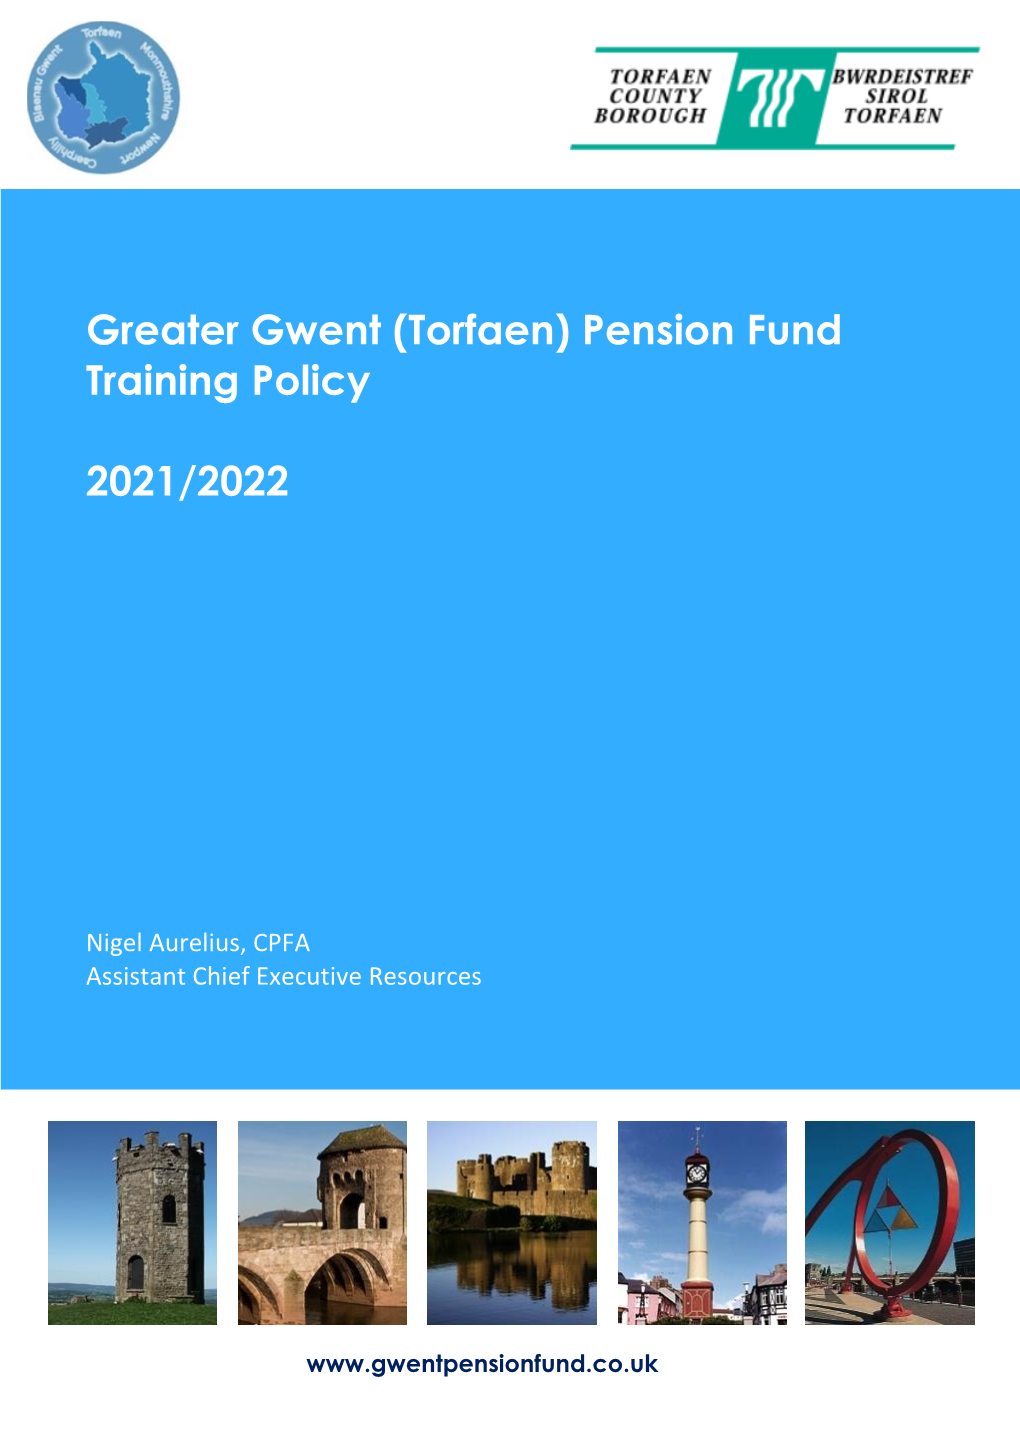 Greater Gwent (Torfaen) Pension Fund Training Policy 2021/2022